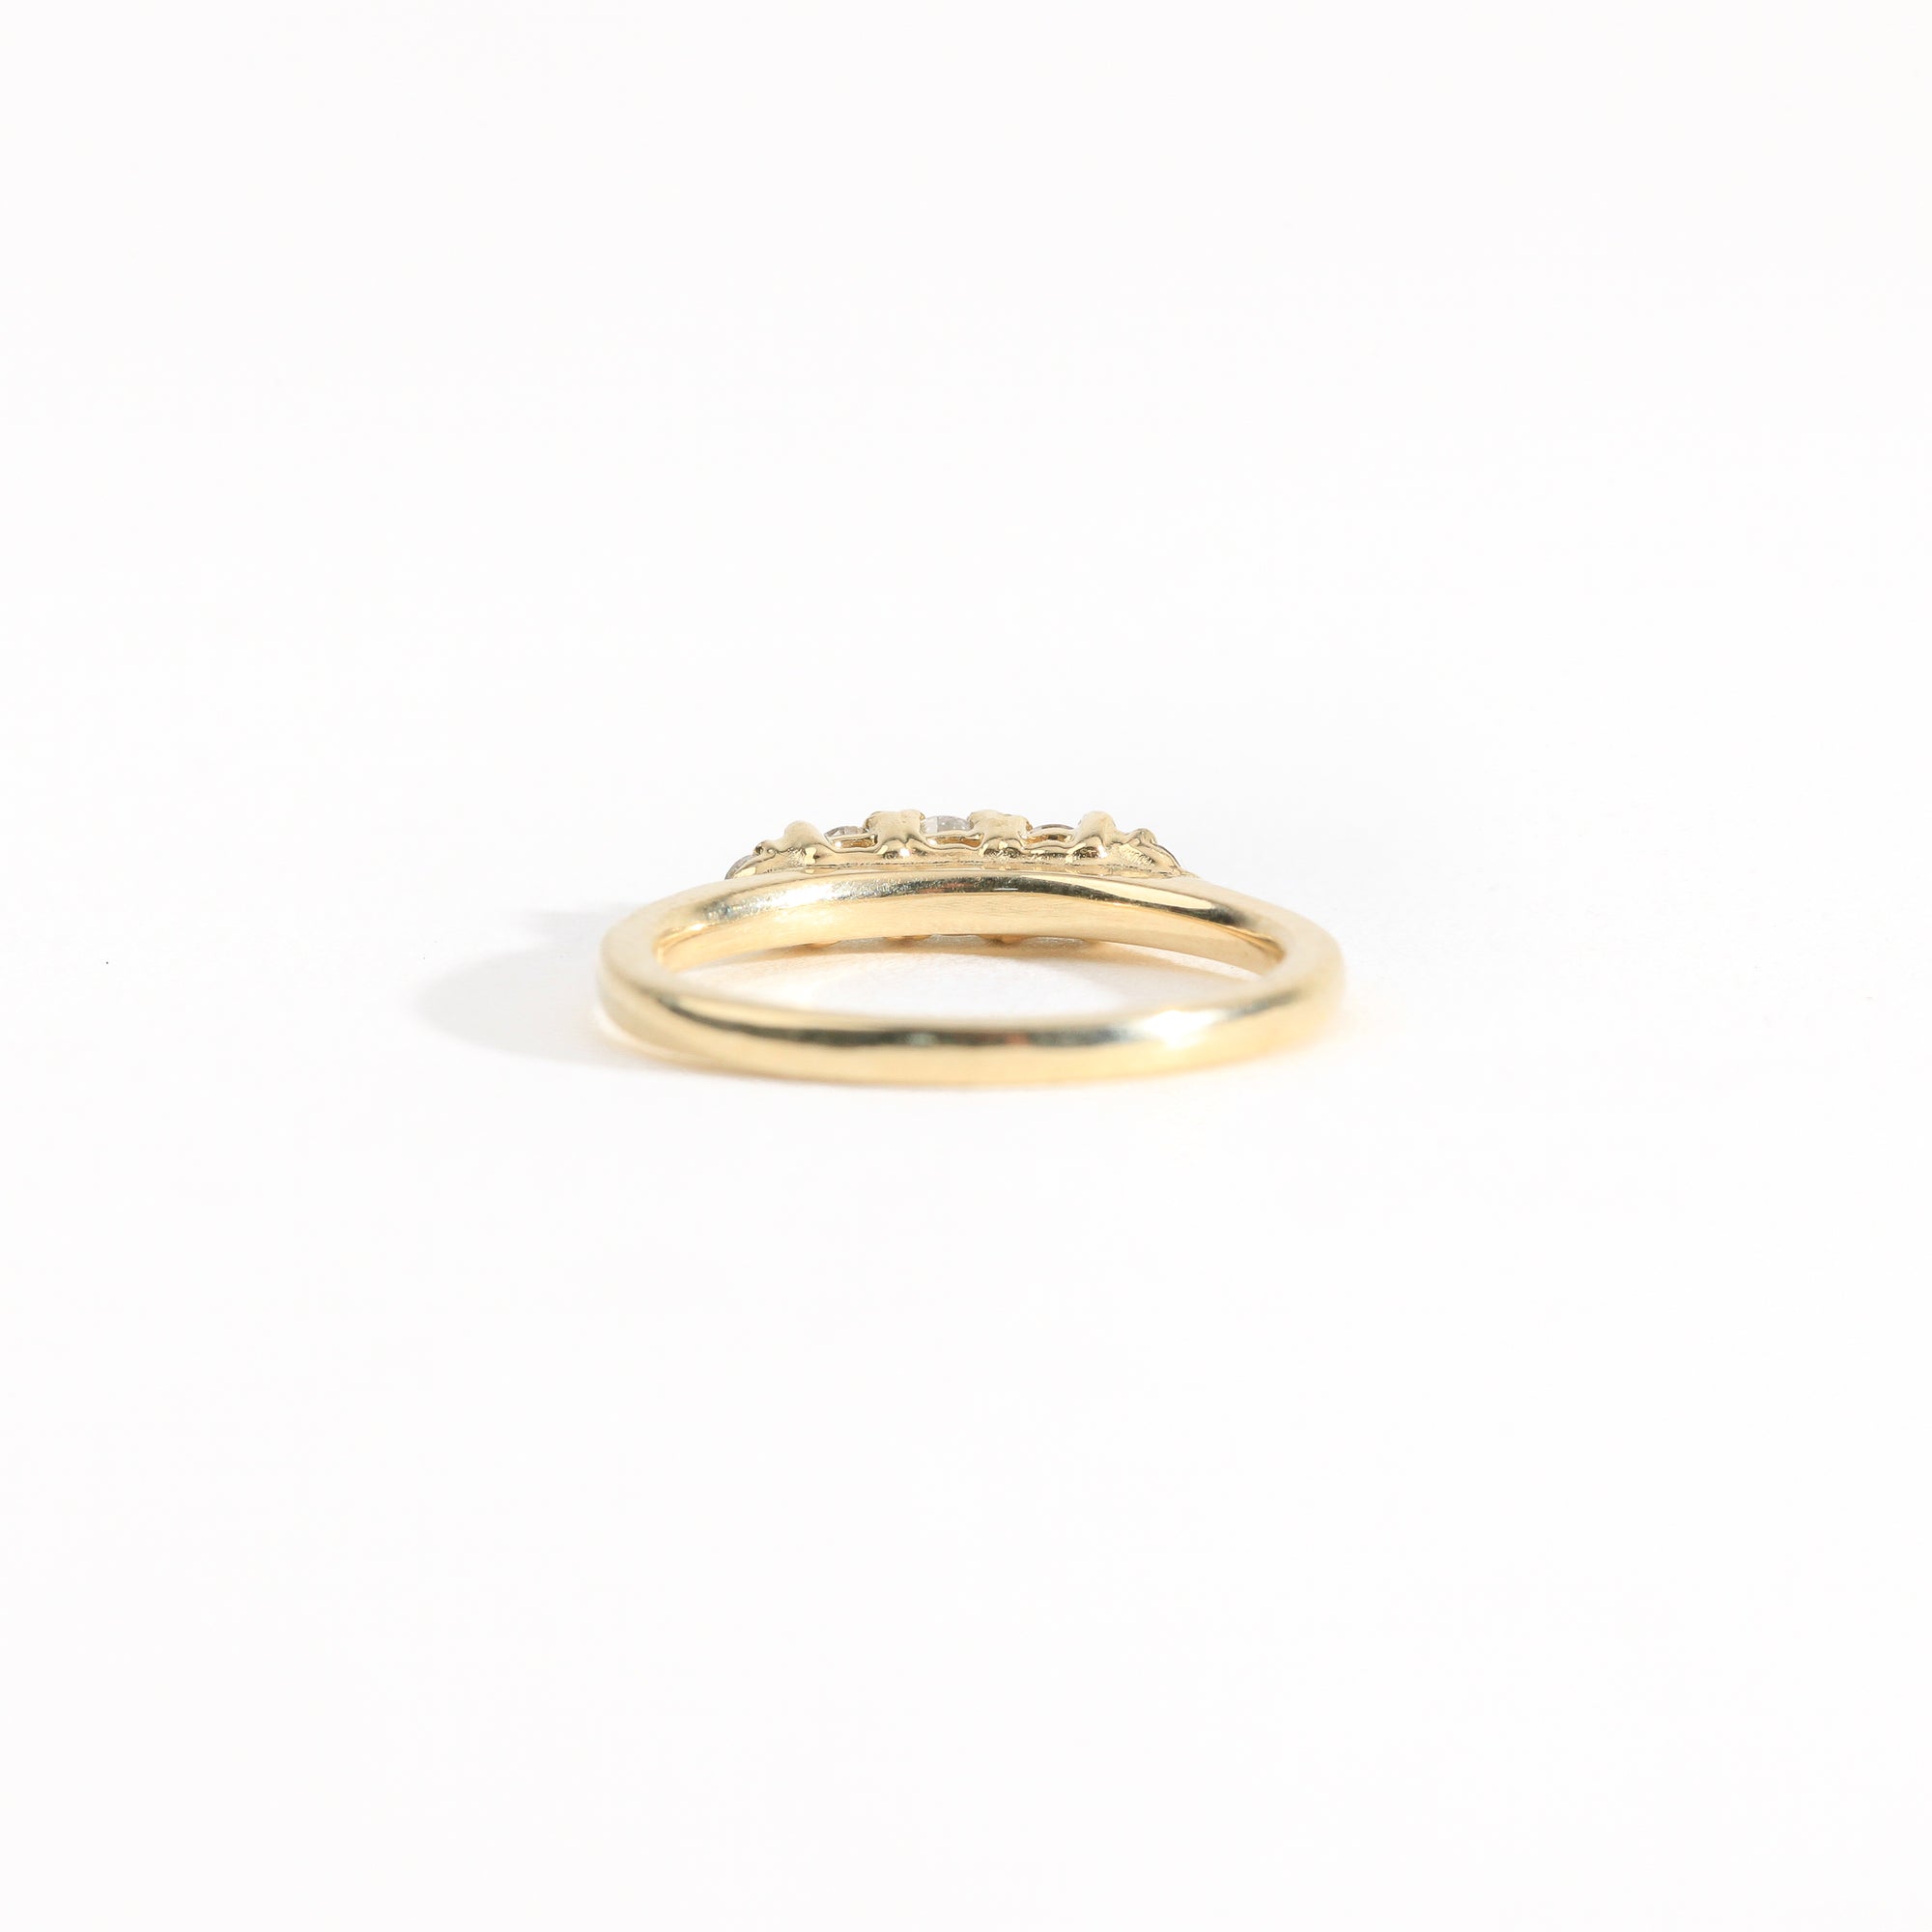 Hand crafted yellow gold five stone champagne diamond ring. 